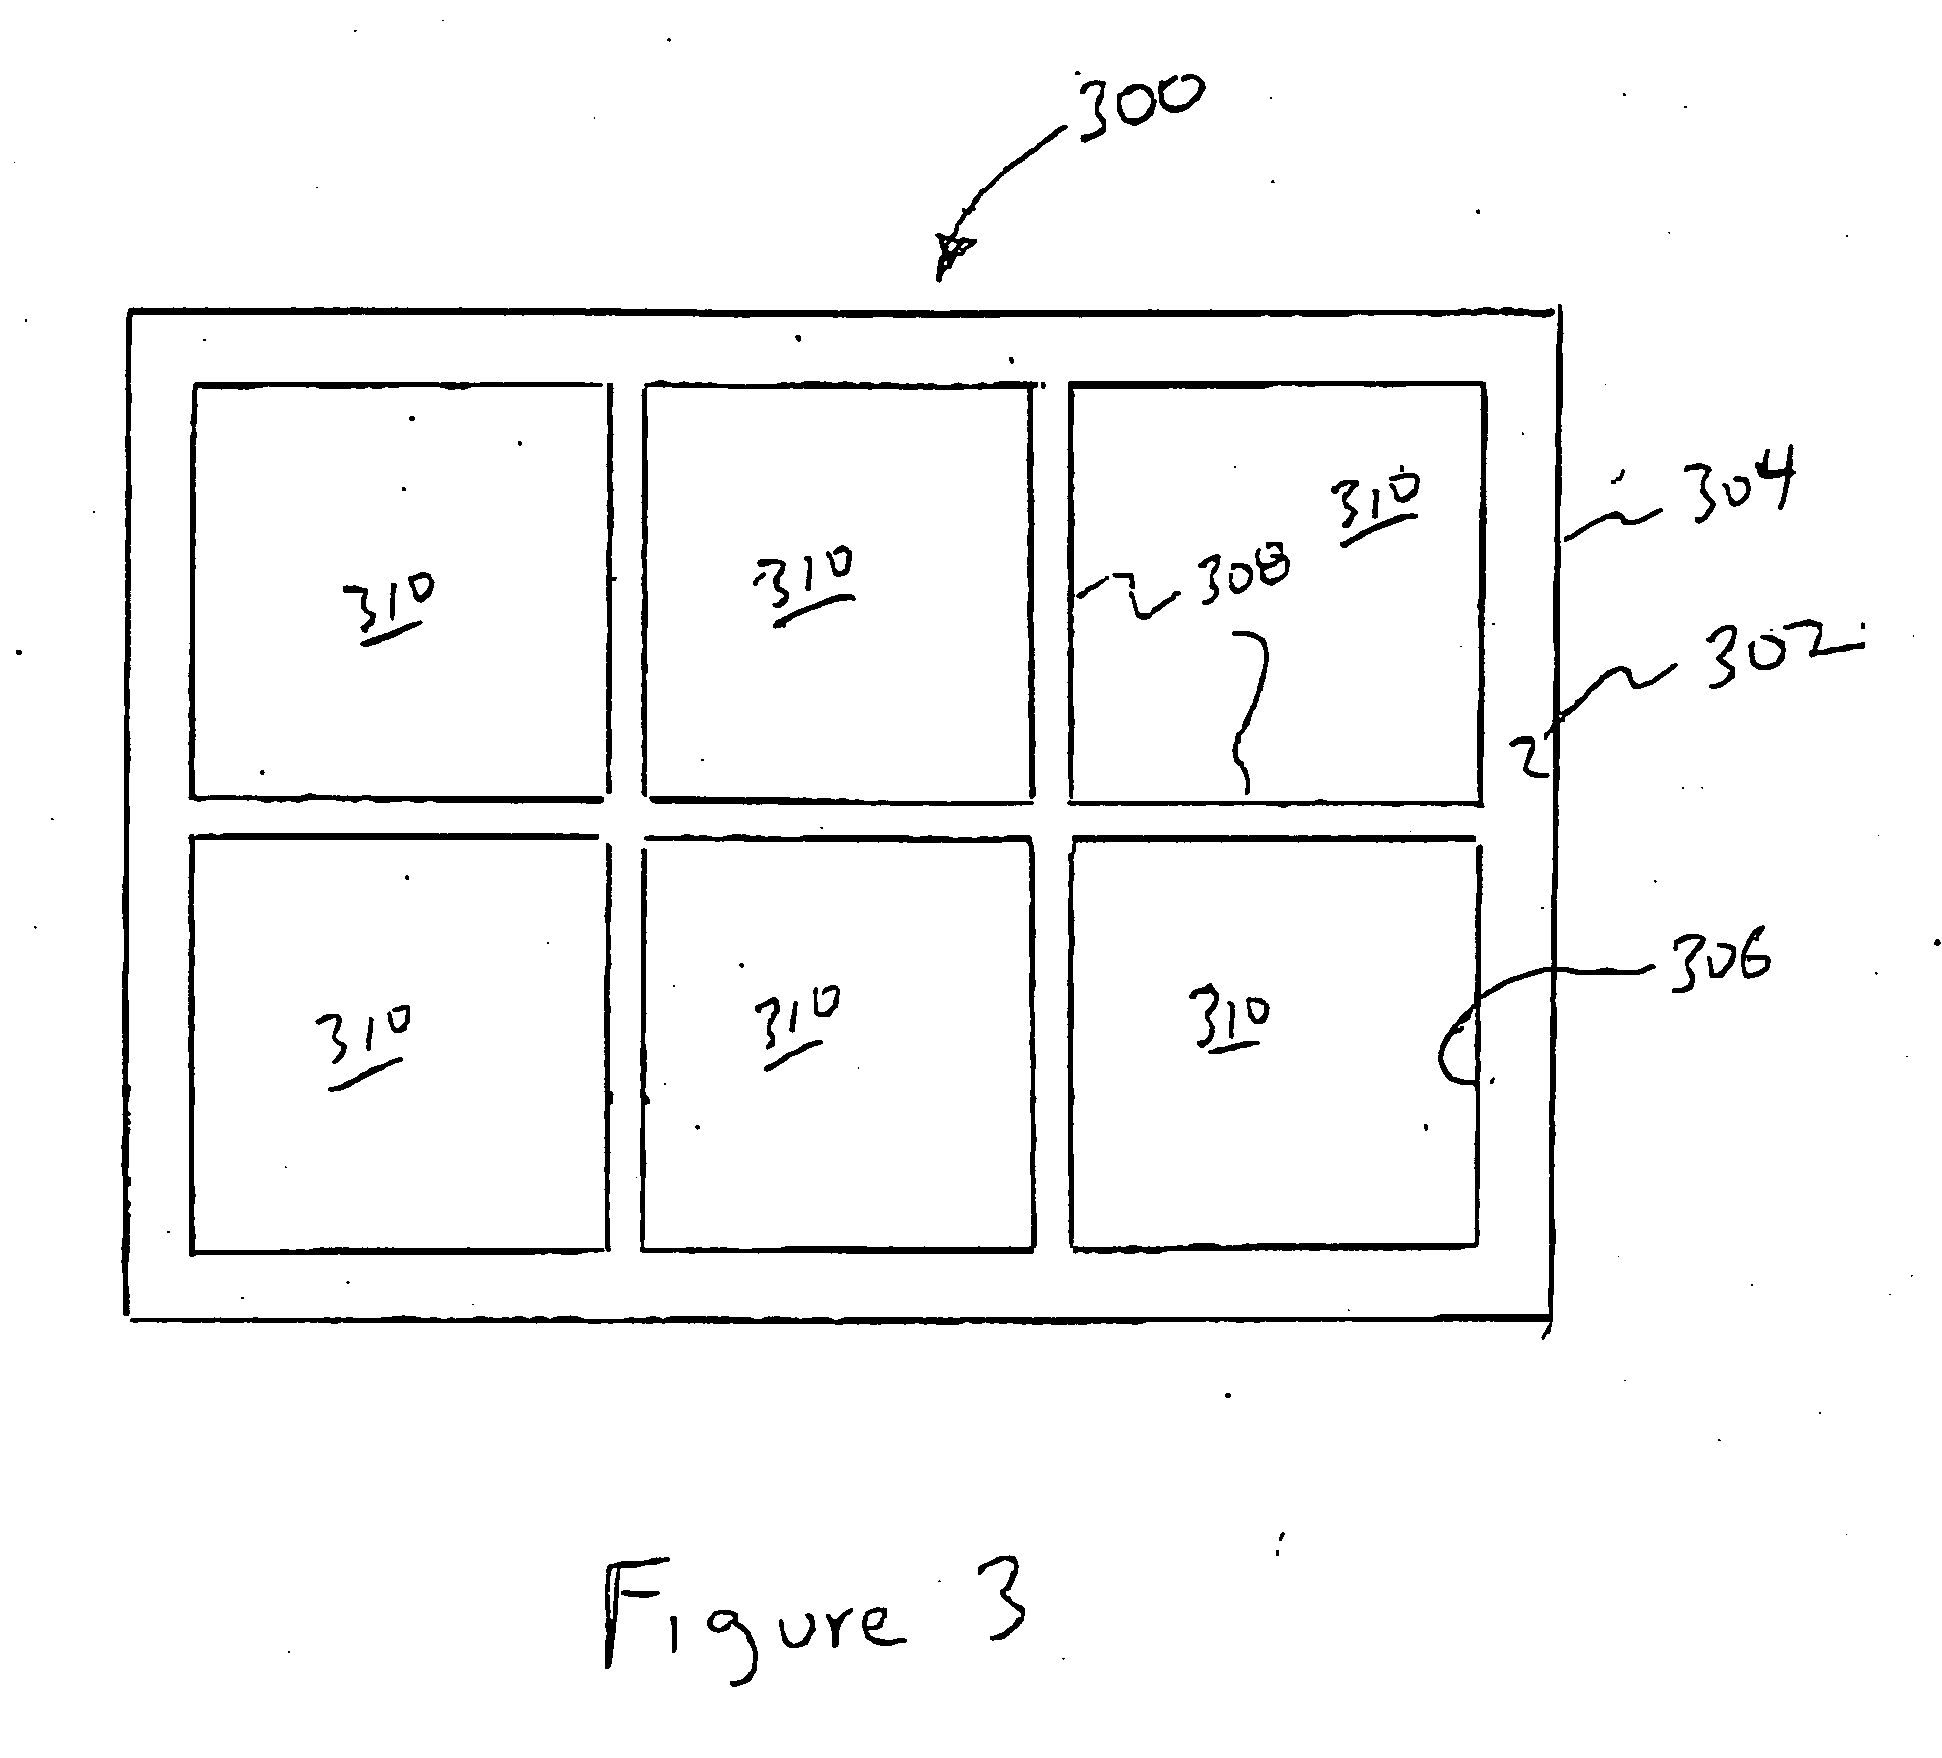 Apparatus and method for supporting a flexible substrate during processing